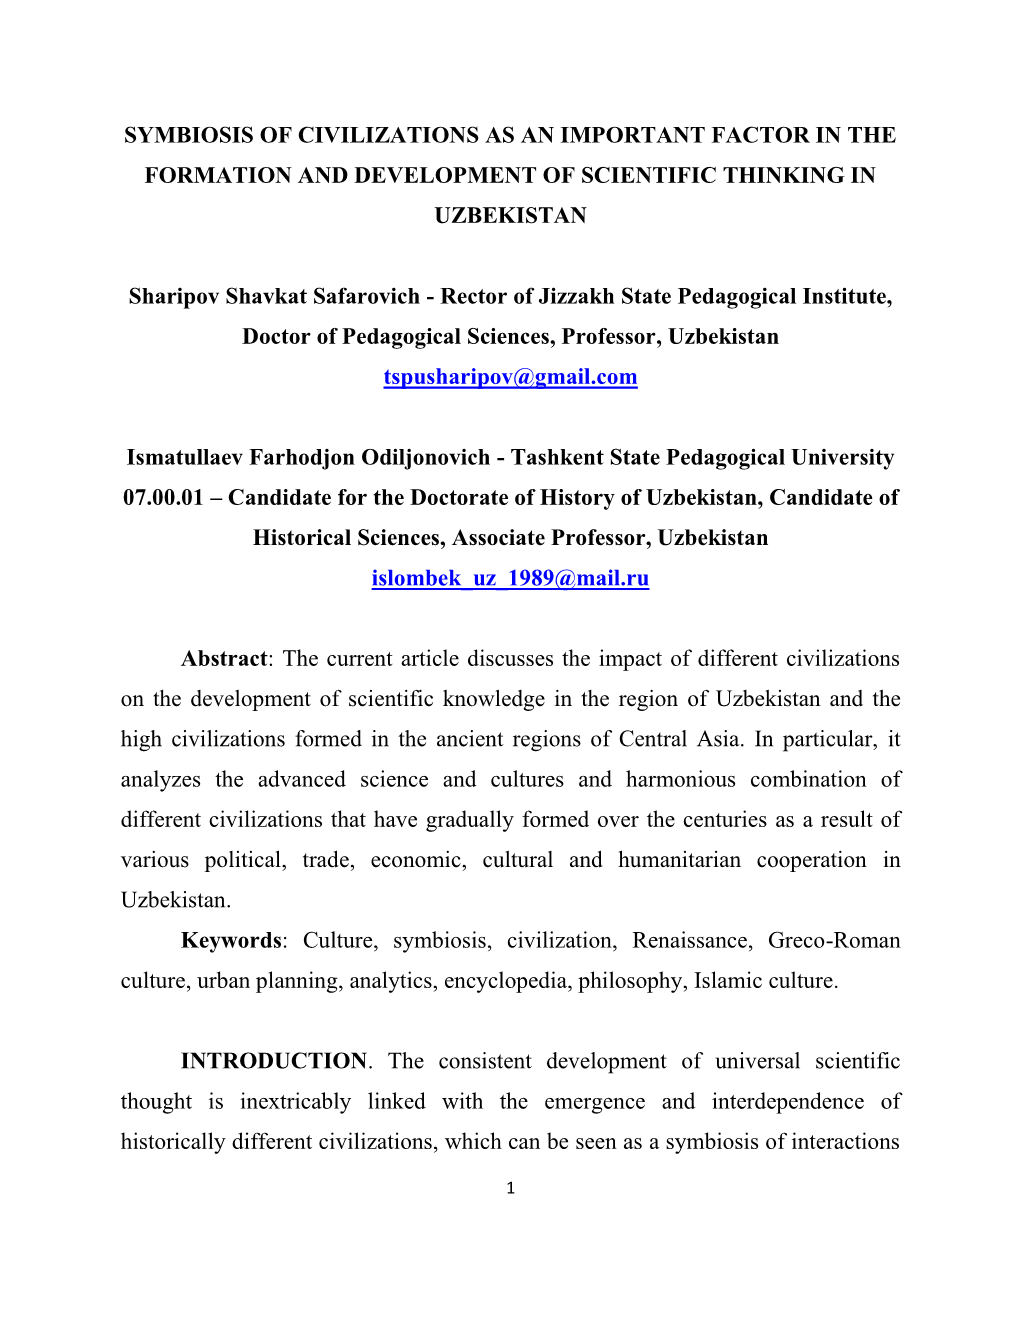 Symbiosis of Civilizations As an Important Factor in the Formation and Development of Scientific Thinking in Uzbekistan